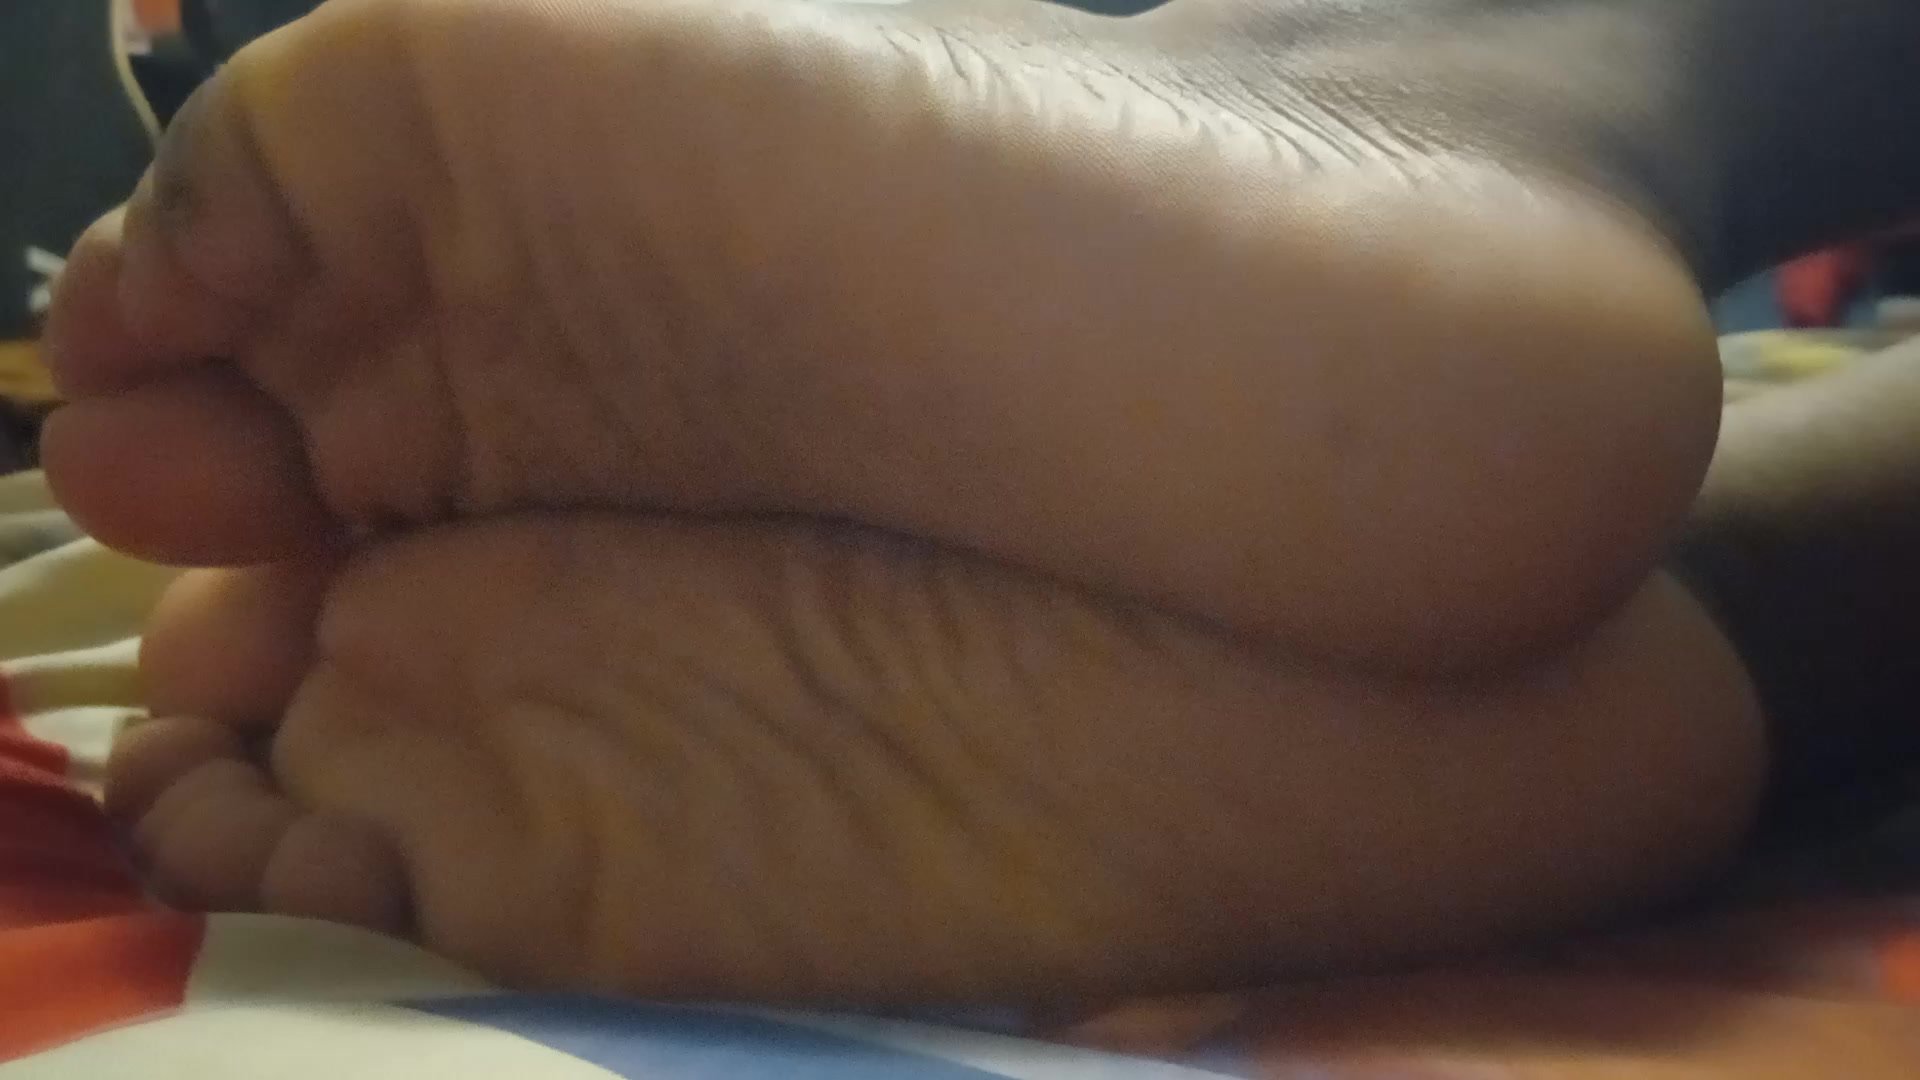 My ticklish soles and toes